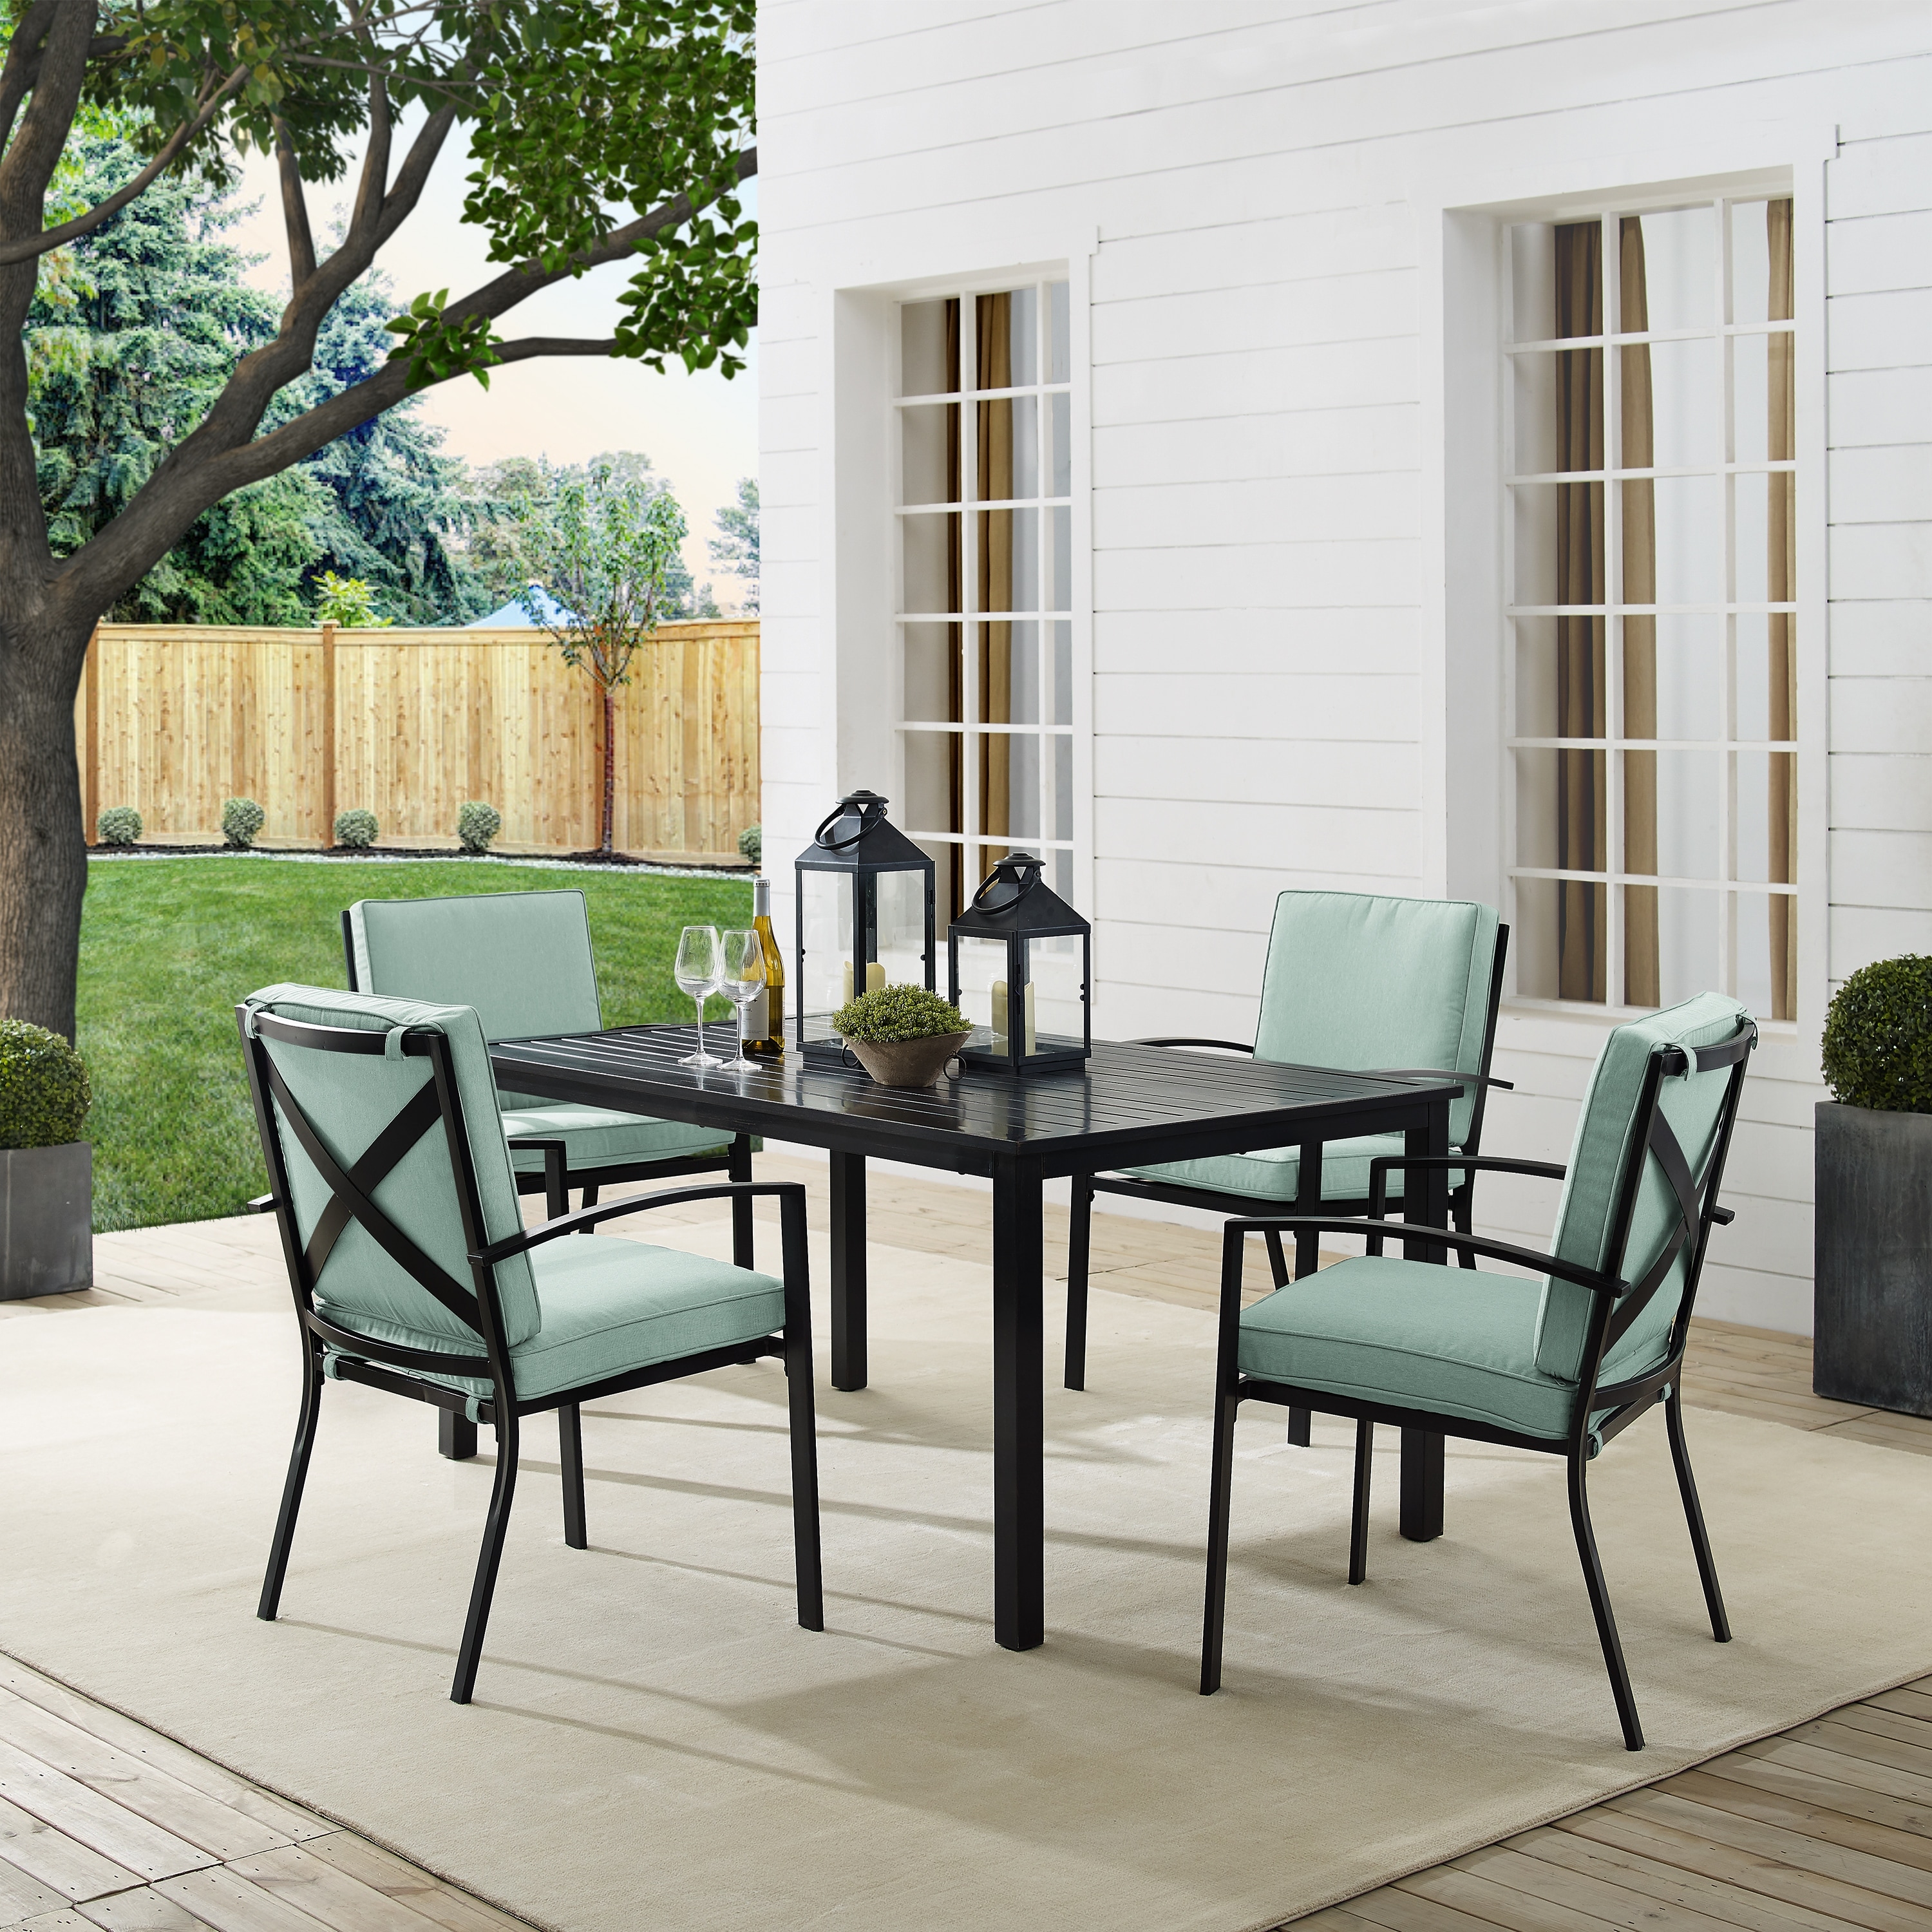 Kaplan 5-piece Oil-rubbed Bronze Green Cushions Outdoor Dining Set